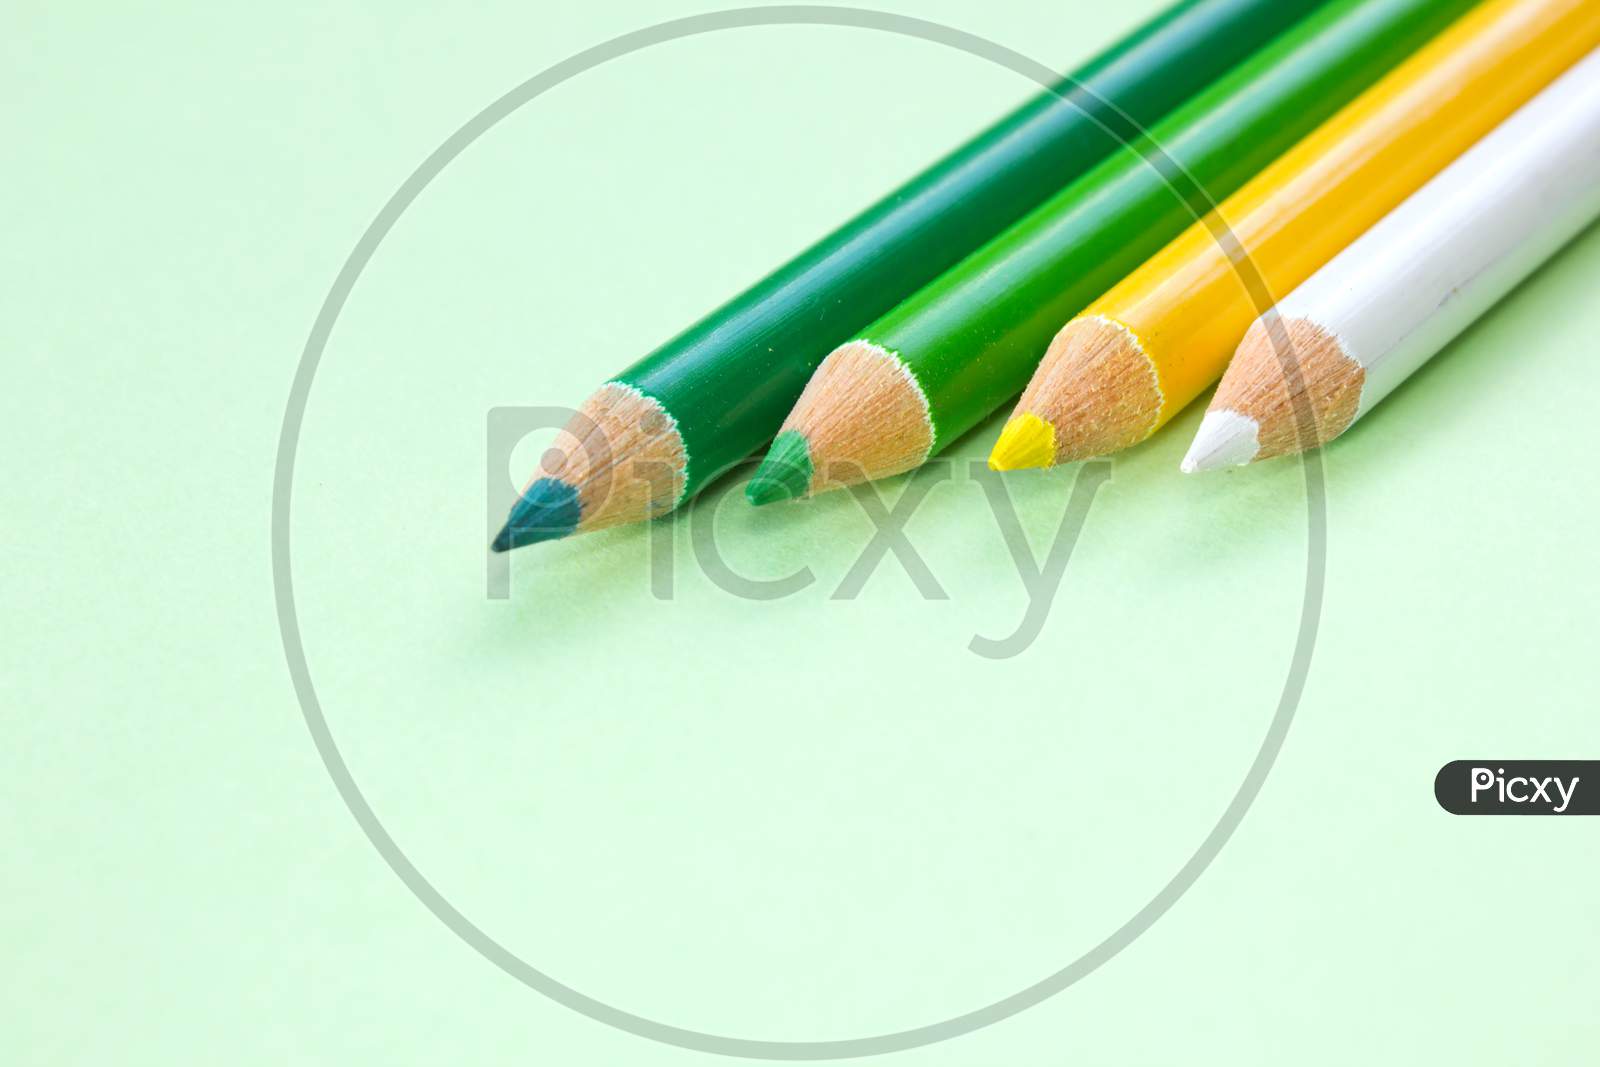 Colour Pencils on a green colored background